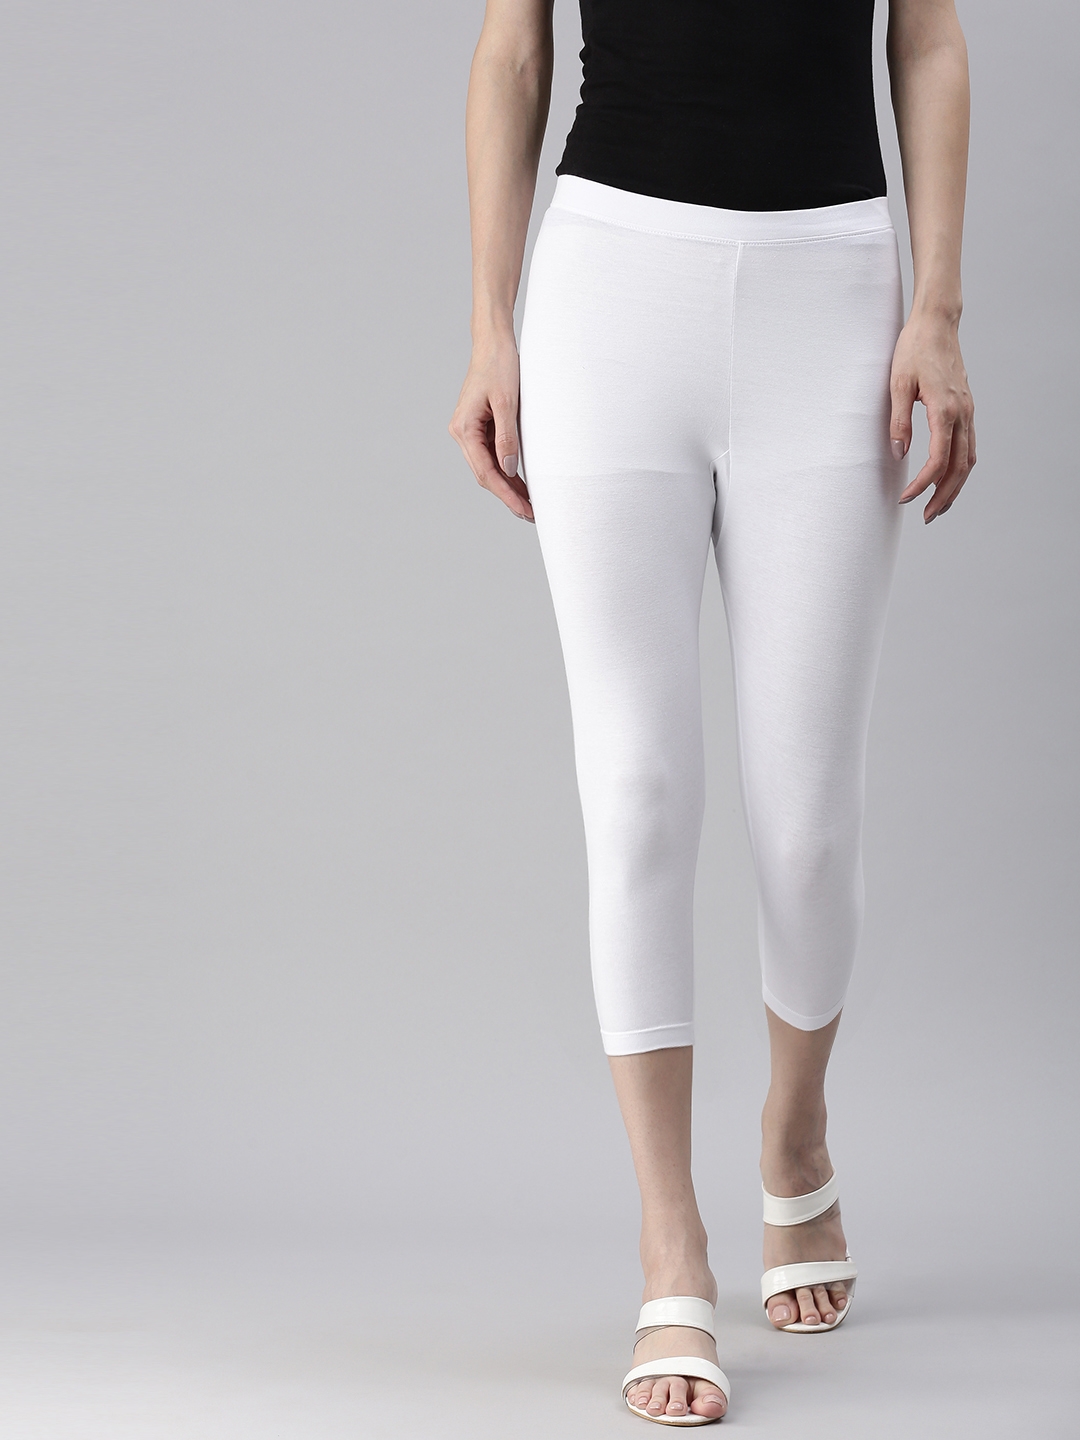 Kryptic | Kryptic Women Cotton Stretched Solid  White Mid-Ankle length Legging 0